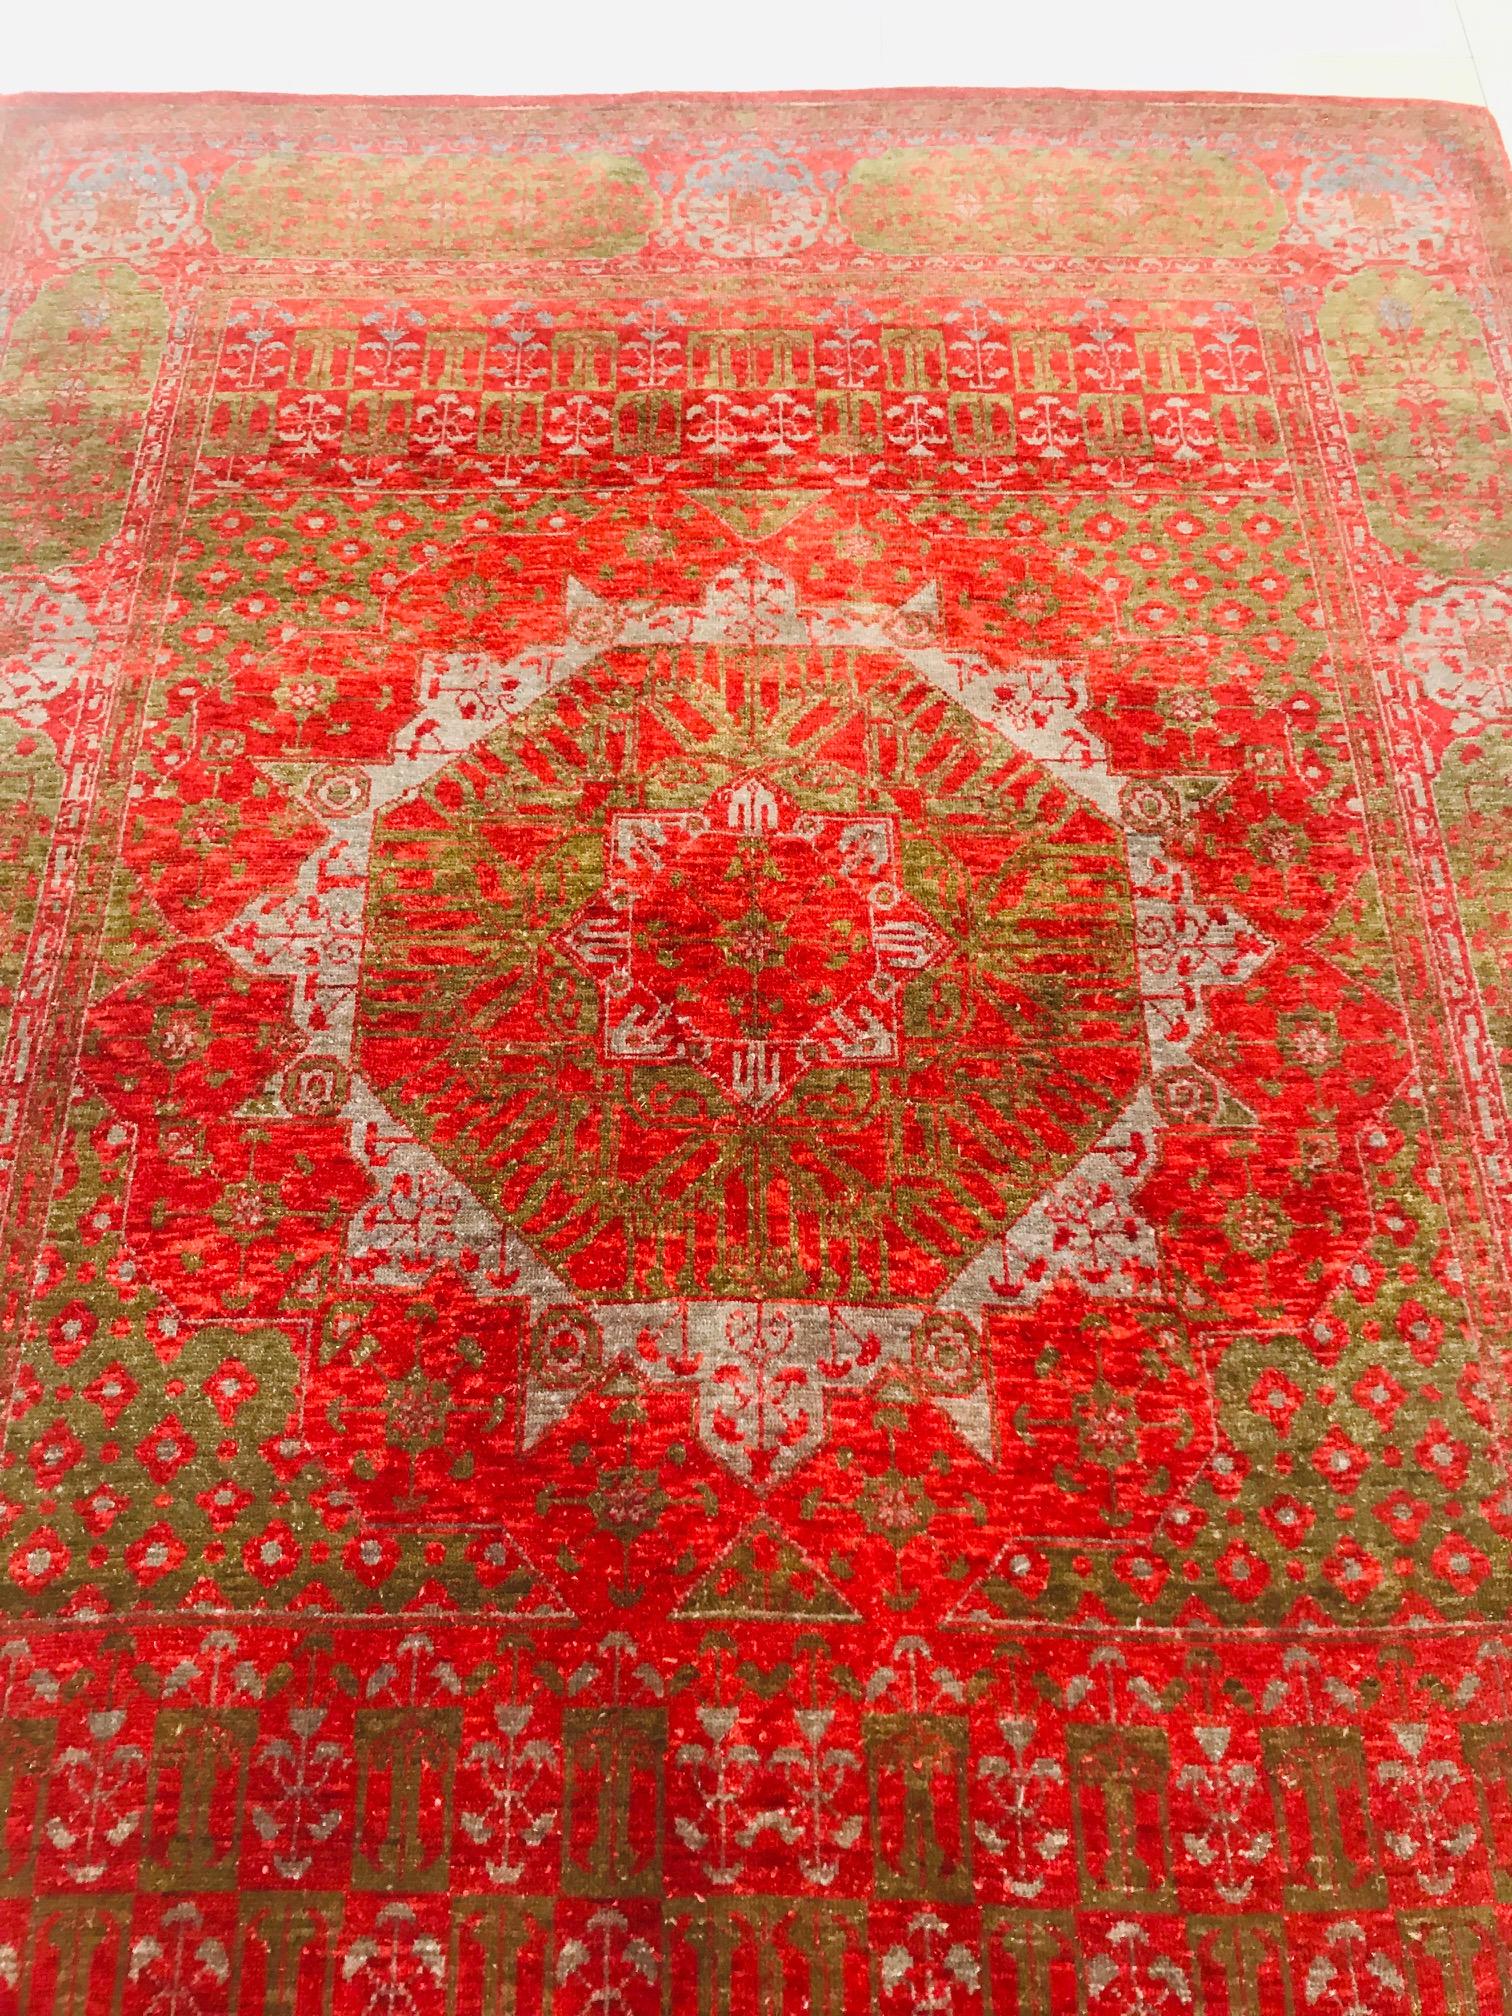 20th Century Hand-Knitted in Wool Rug or Carpet in Red and Green Colors In Excellent Condition For Sale In Valencia, Spain